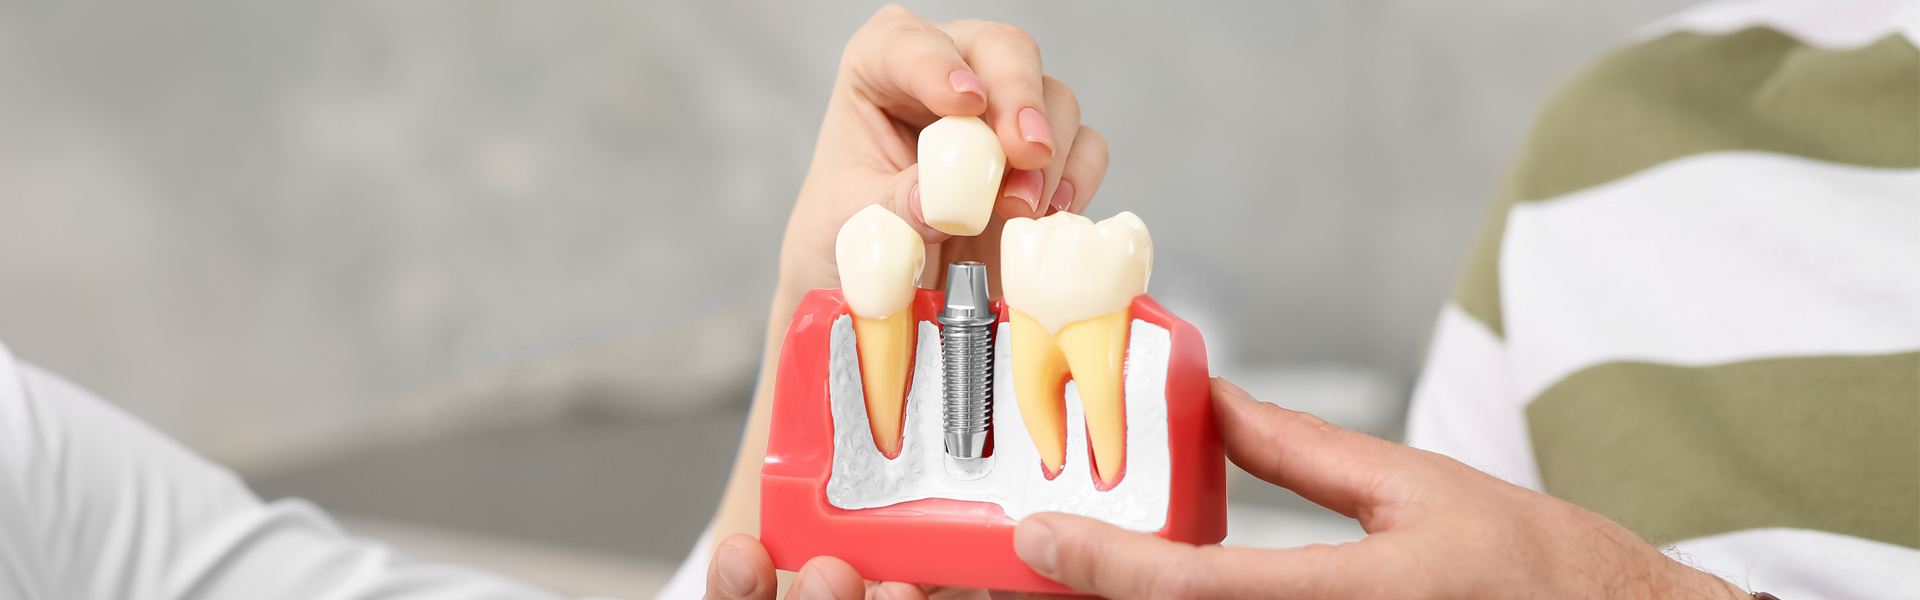 How to Maintain Proper Oral Care With Dental Implants